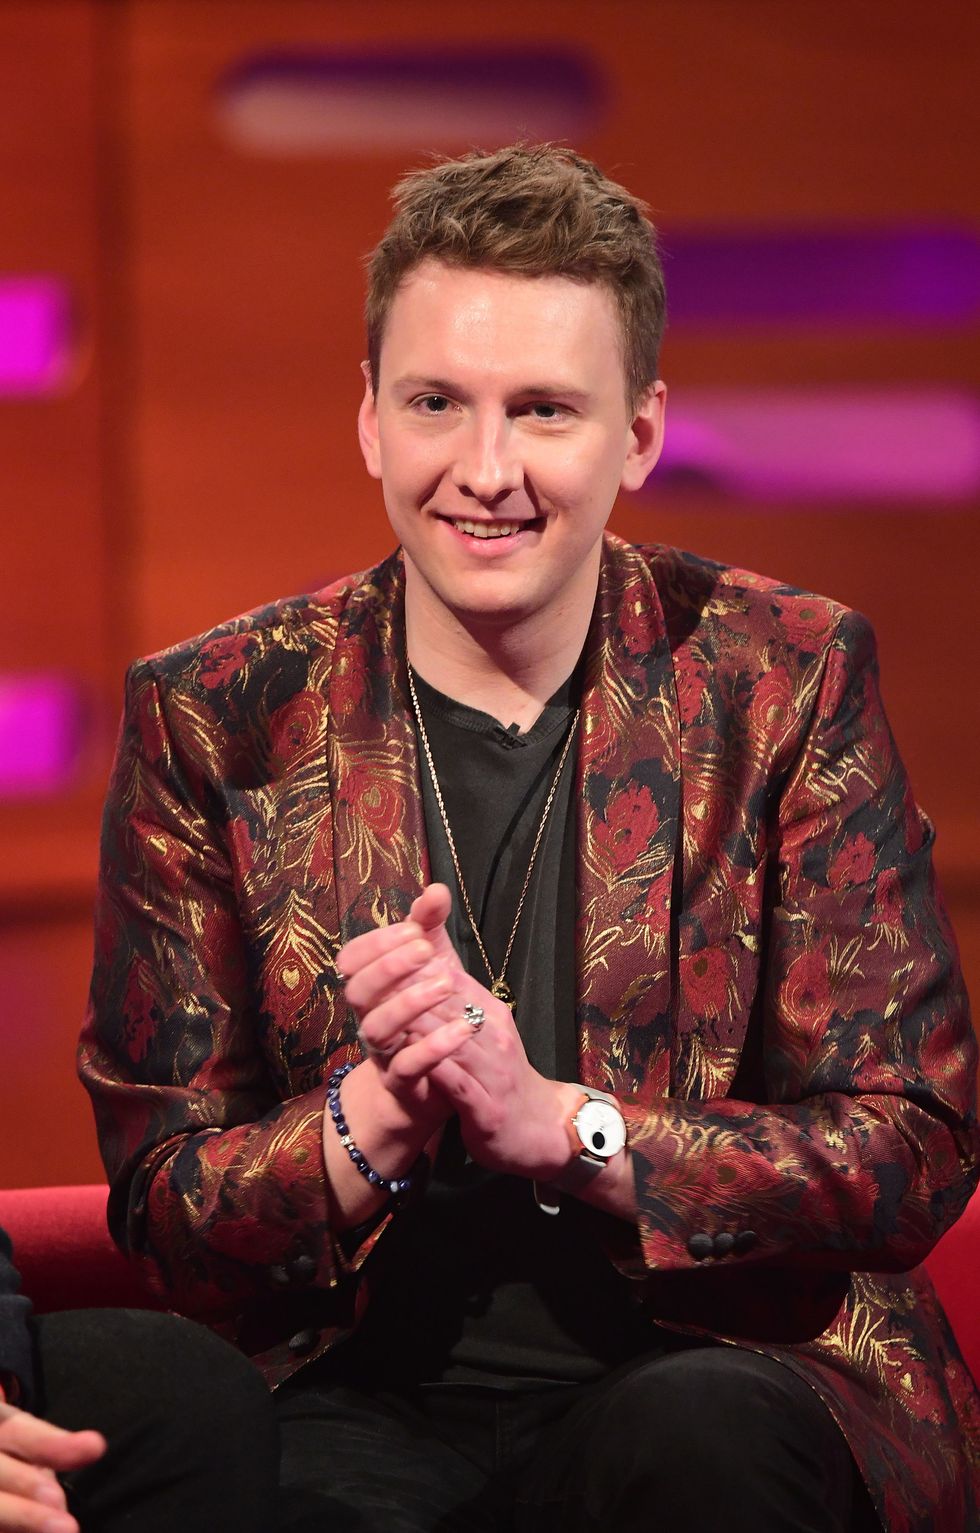 Joe Lycett reaches homelessness charity target in response to Braverman comments